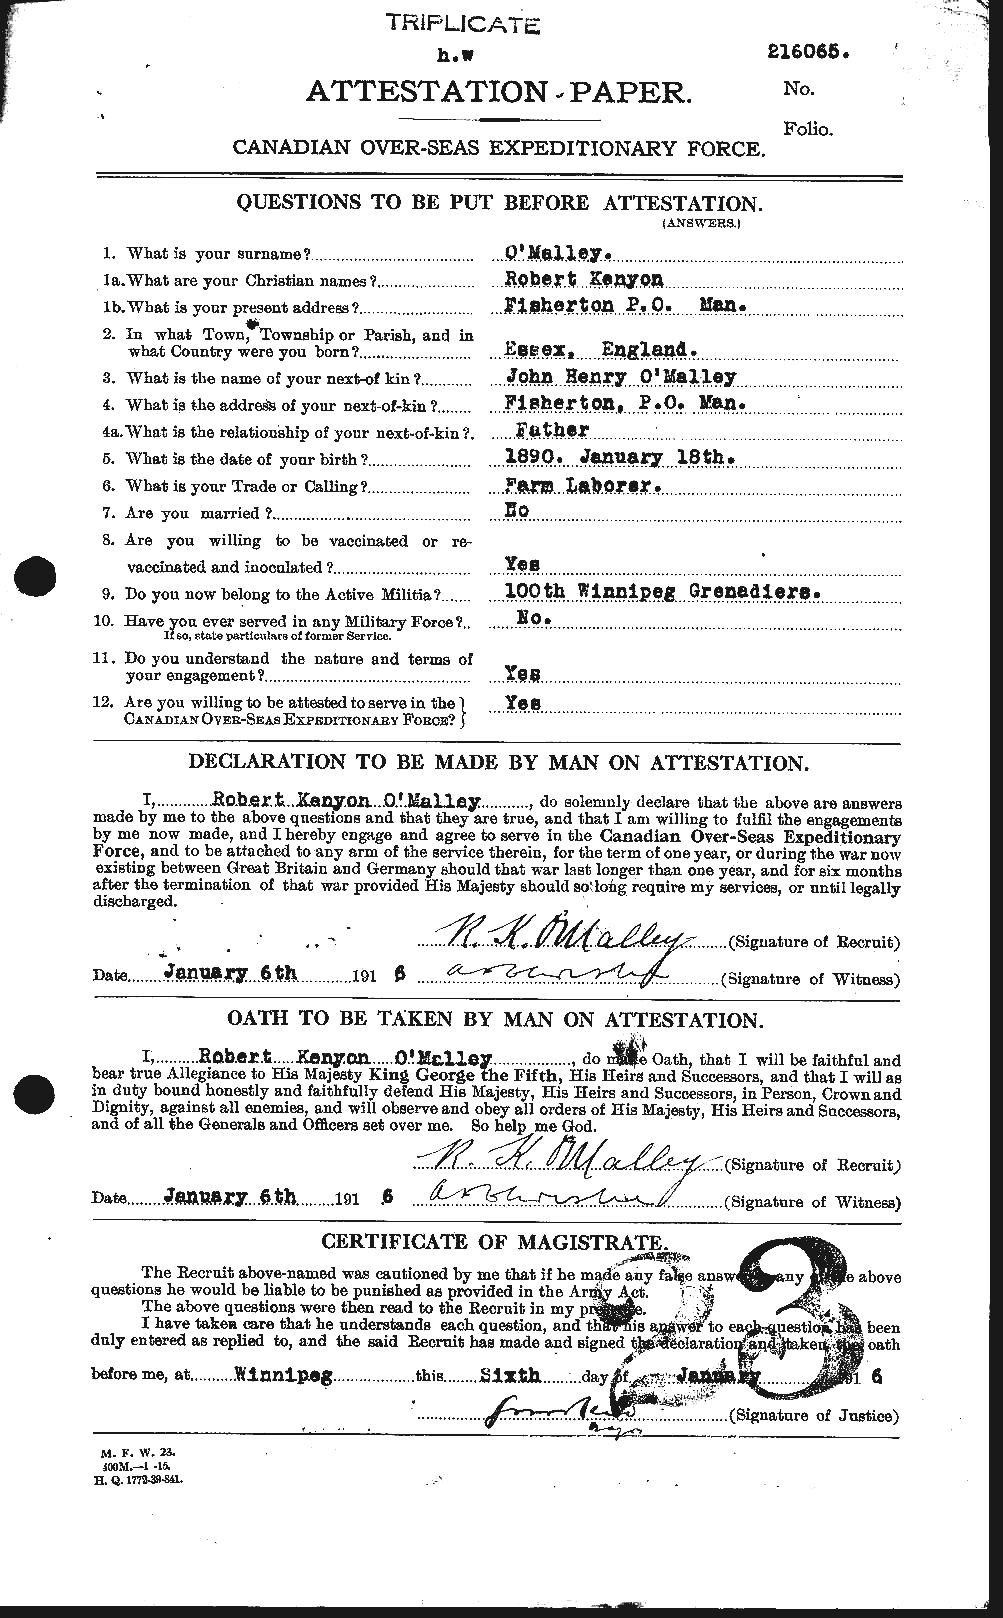 Personnel Records of the First World War - CEF 689997a